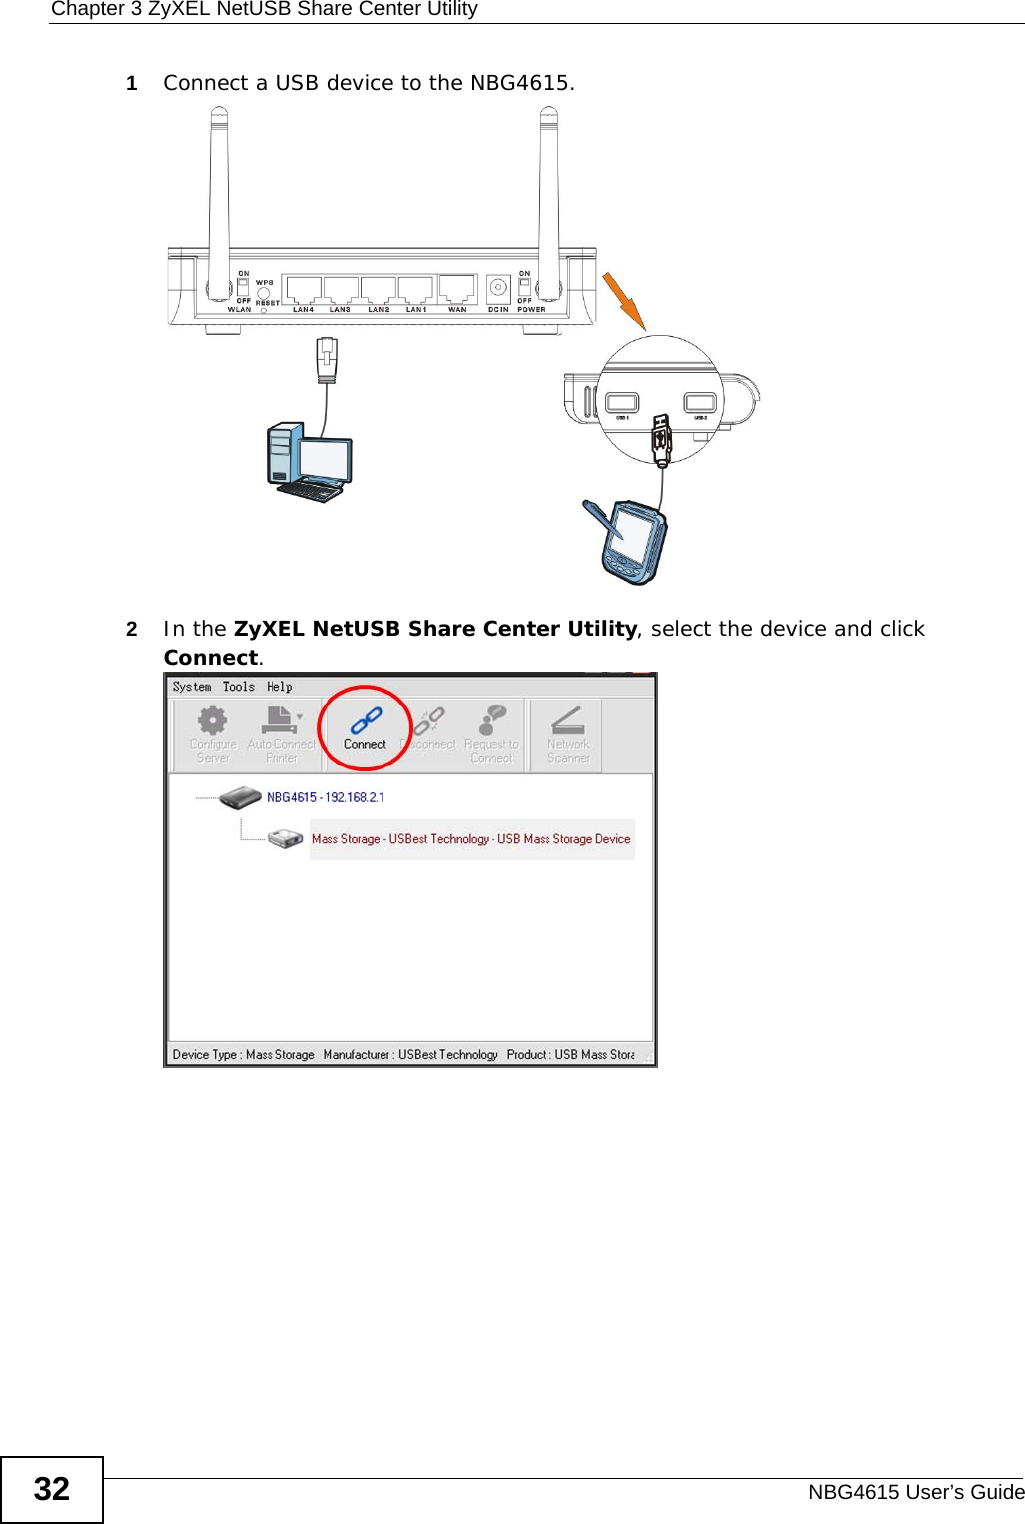 Chapter 3 ZyXEL NetUSB Share Center UtilityNBG4615 User’s Guide321Connect a USB device to the NBG4615.2In the ZyXEL NetUSB Share Center Utility, select the device and click Connect. 